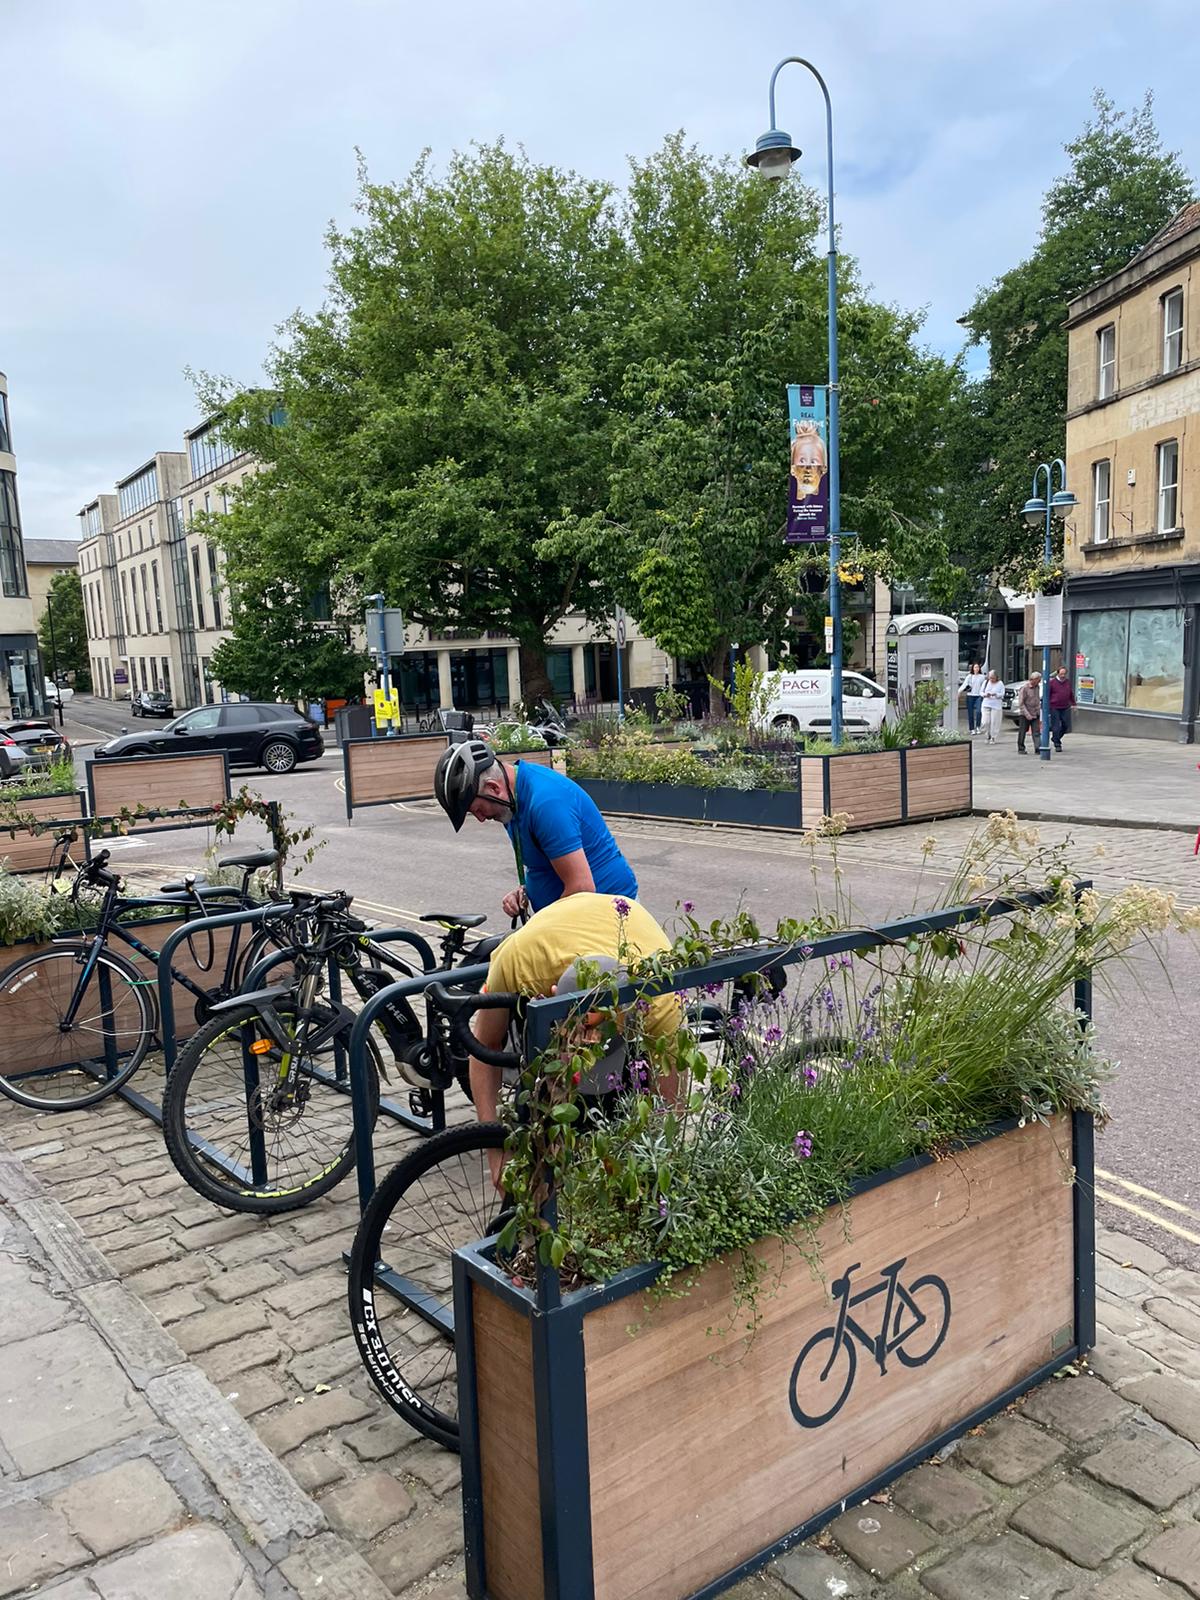 Image showing new cycle rack in use on New Street